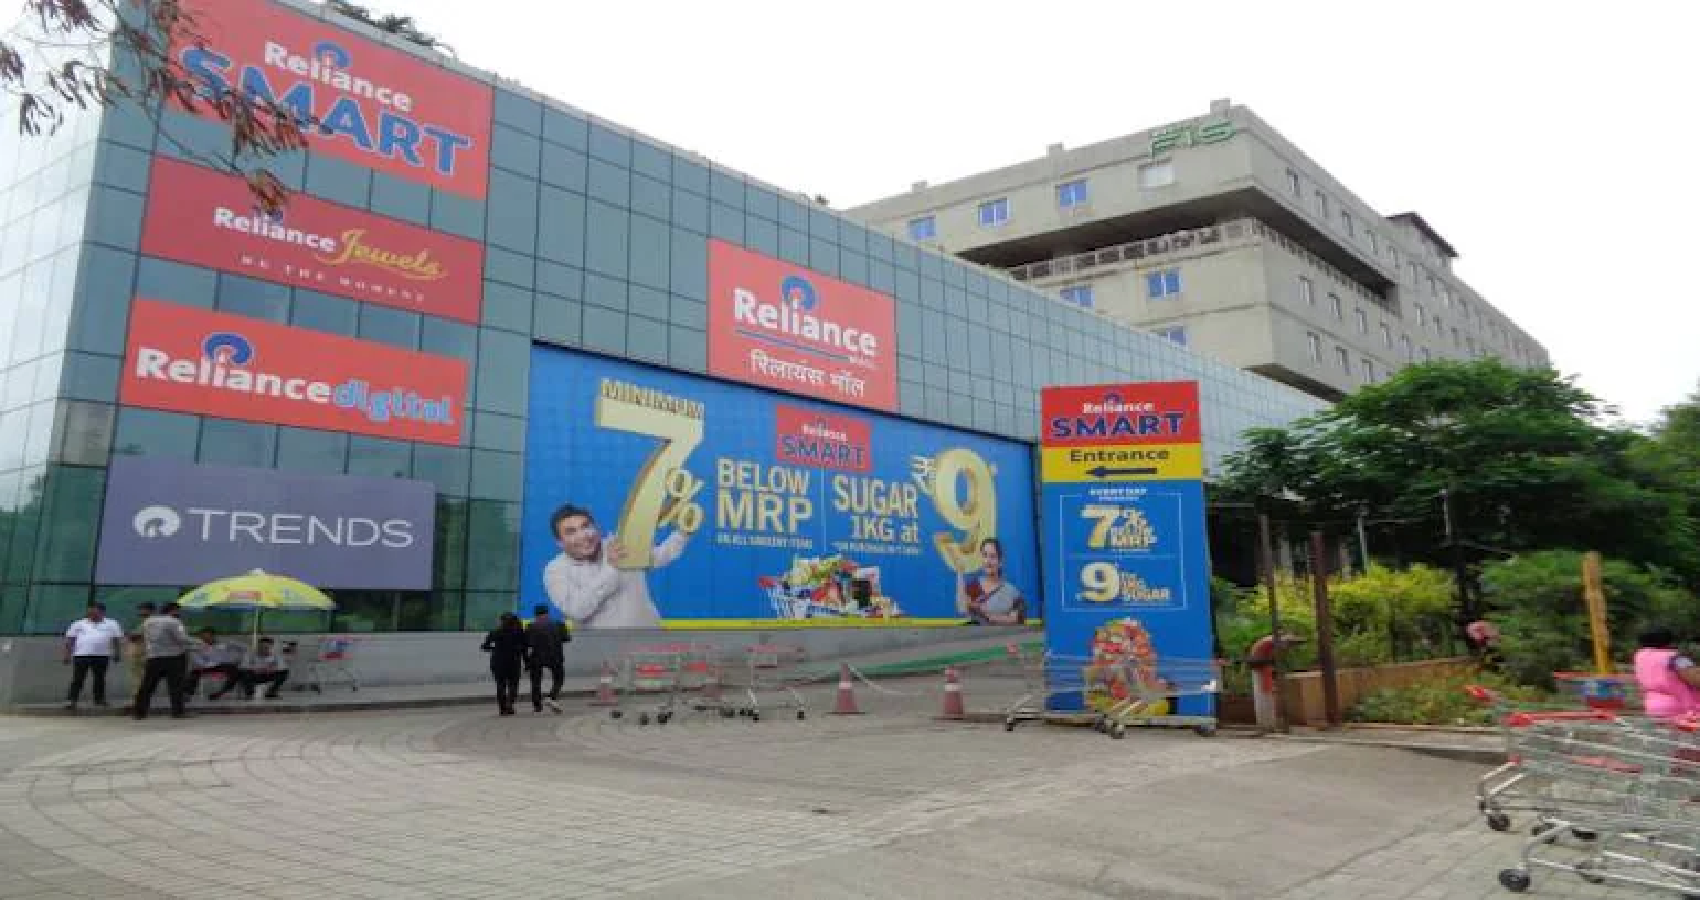 Reliance Is One Of The Fastest Growing Retailer In The World